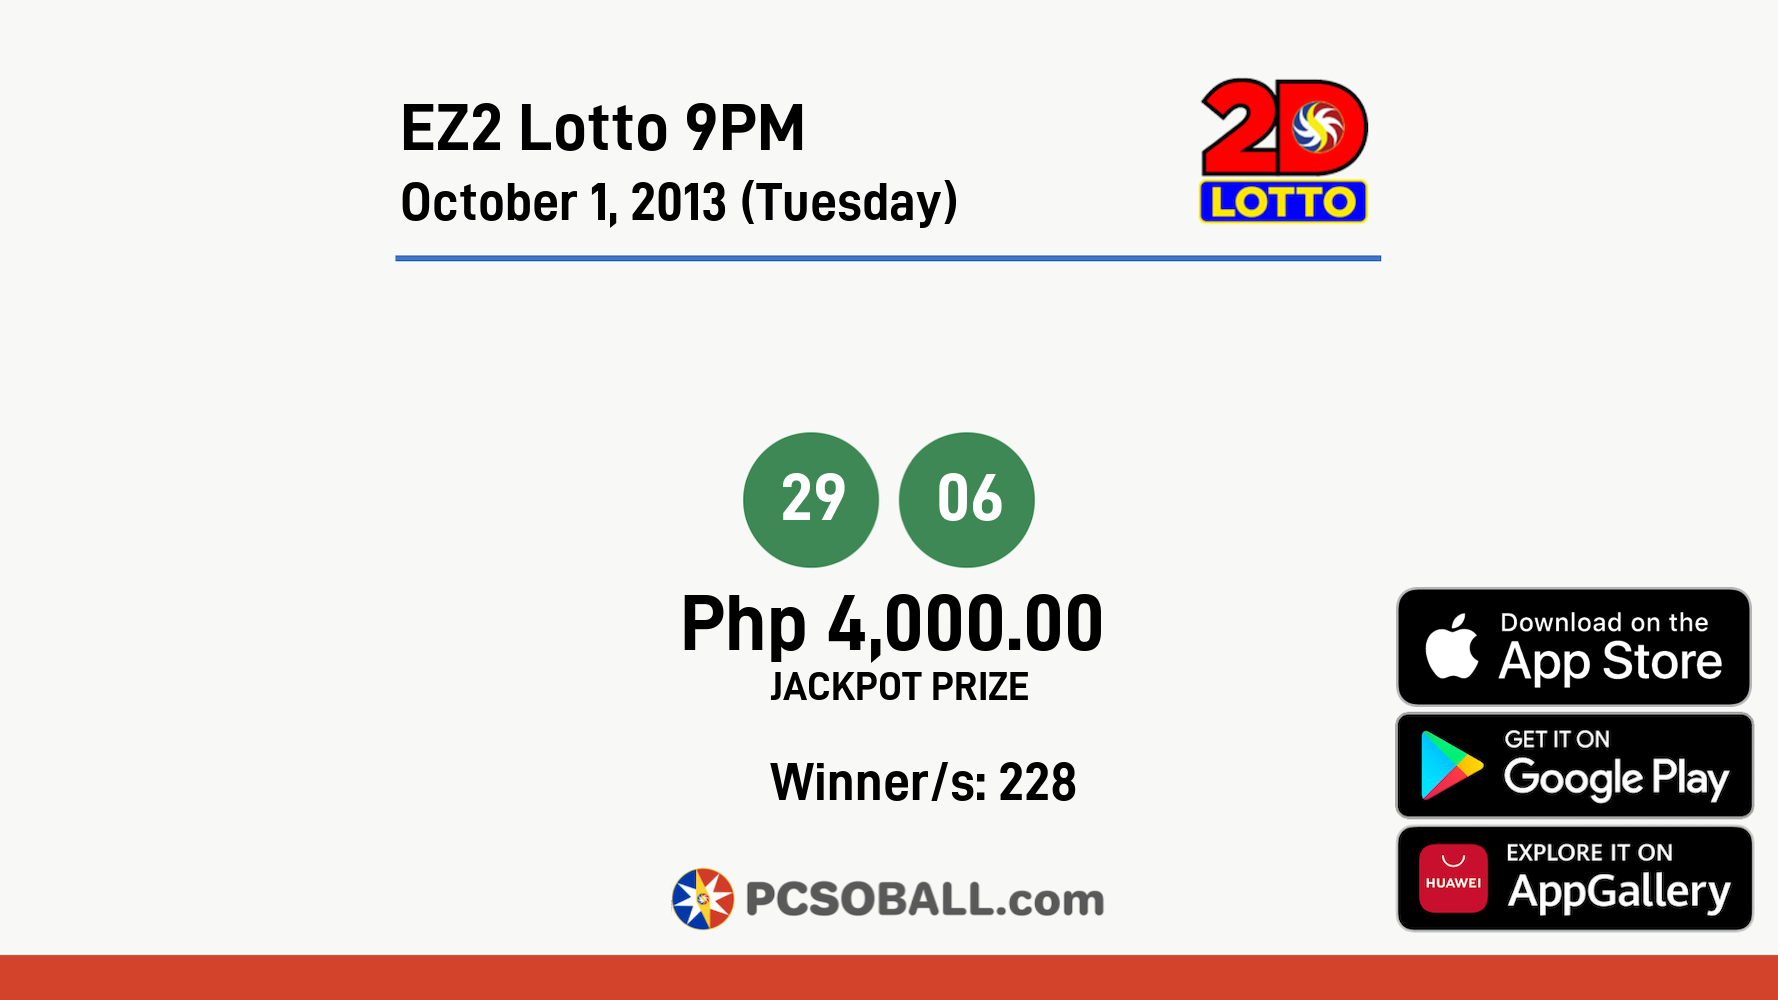 EZ2 Lotto 9PM October 1, 2013 (Tuesday) Result